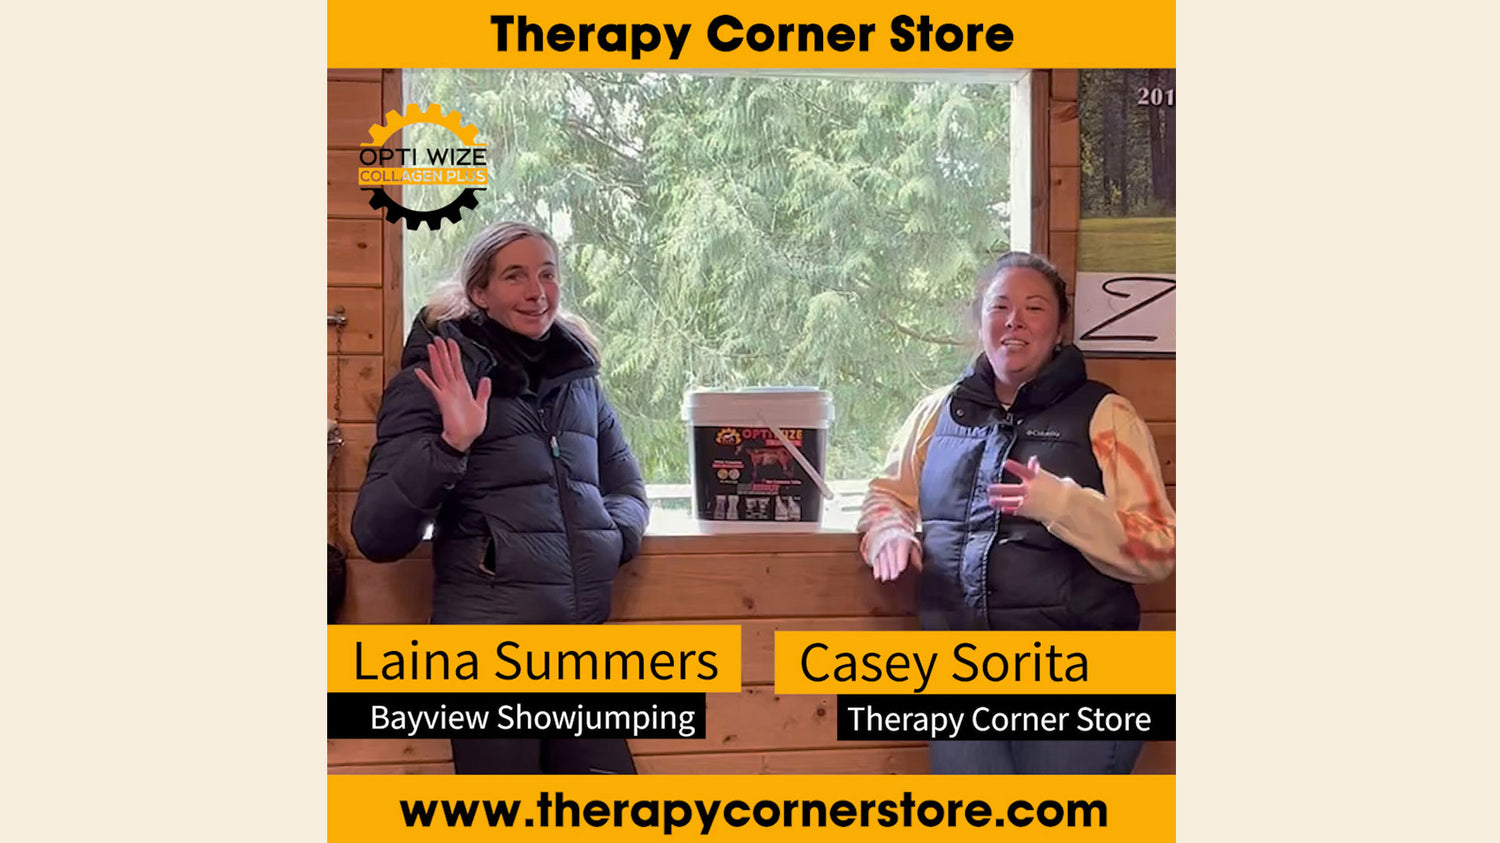 <p>Therapy Corner Store and Laina Summers of Bay view Showjumping<br/>Laina Summers reviews and shares her stories of using OptiWize Equine Collagen Plus.</p>